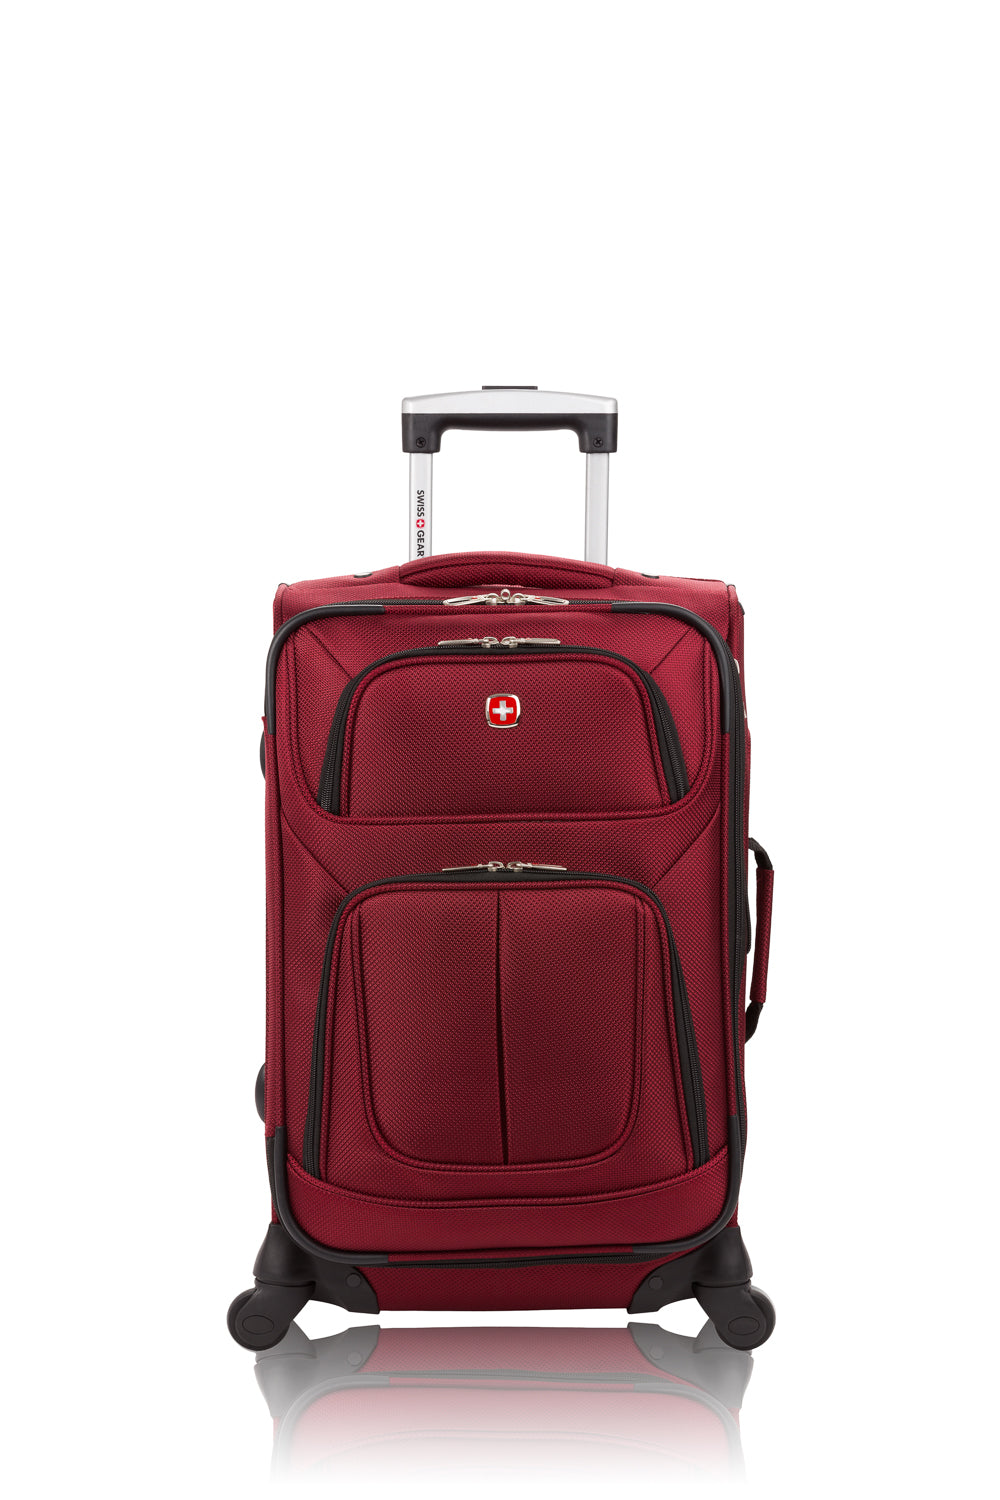 SwissGear 21" Carry On Spinner Suitcase